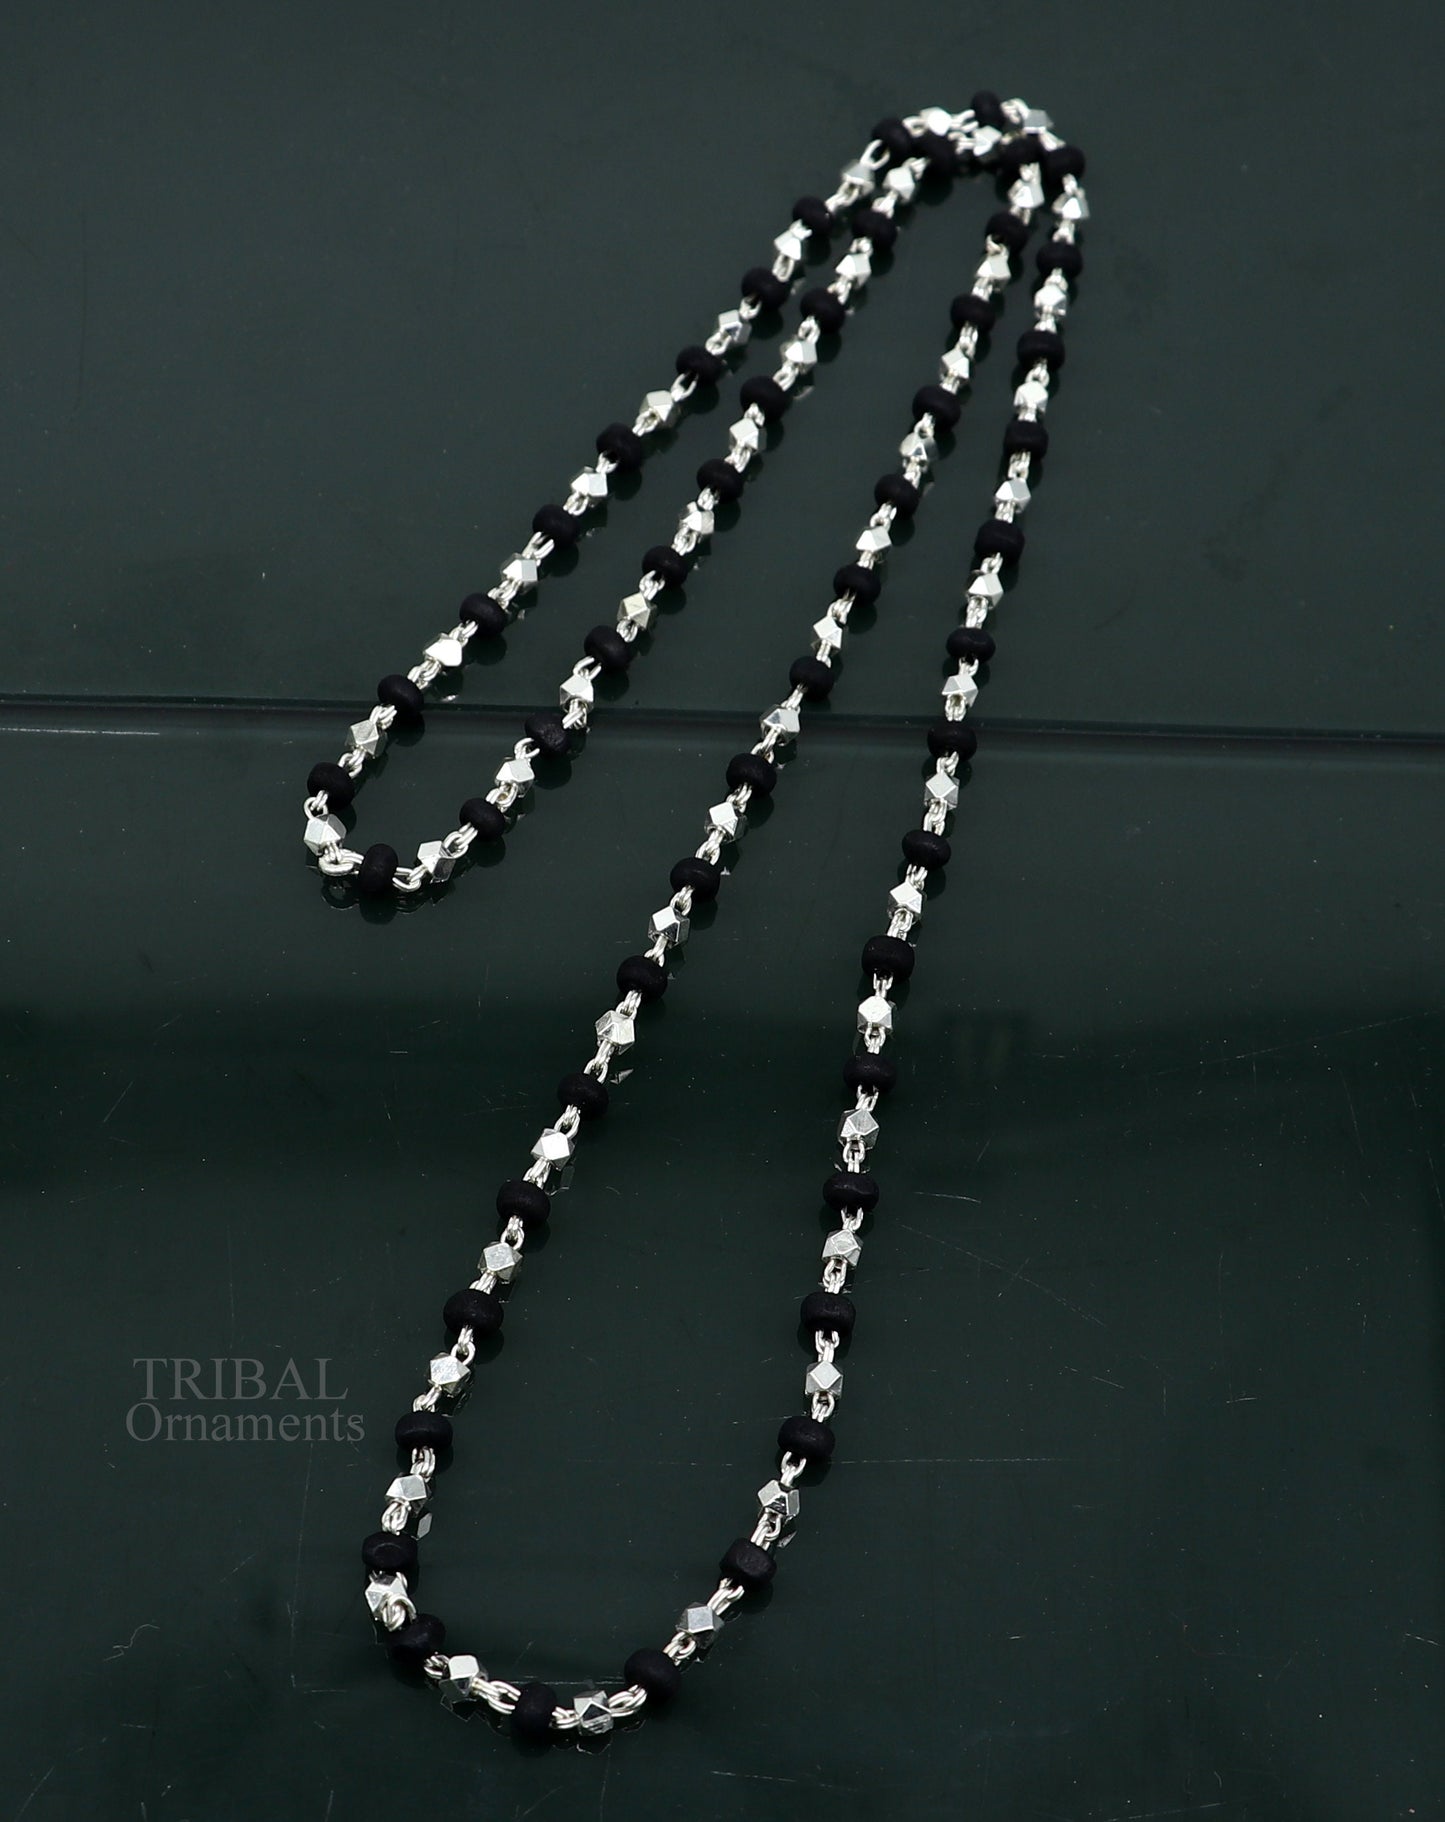 24" 925 sterling silver black holy basil rosary wooden beads 4mm solid chain necklace, excellent unisex stylish necklace from india ch144 - TRIBAL ORNAMENTS